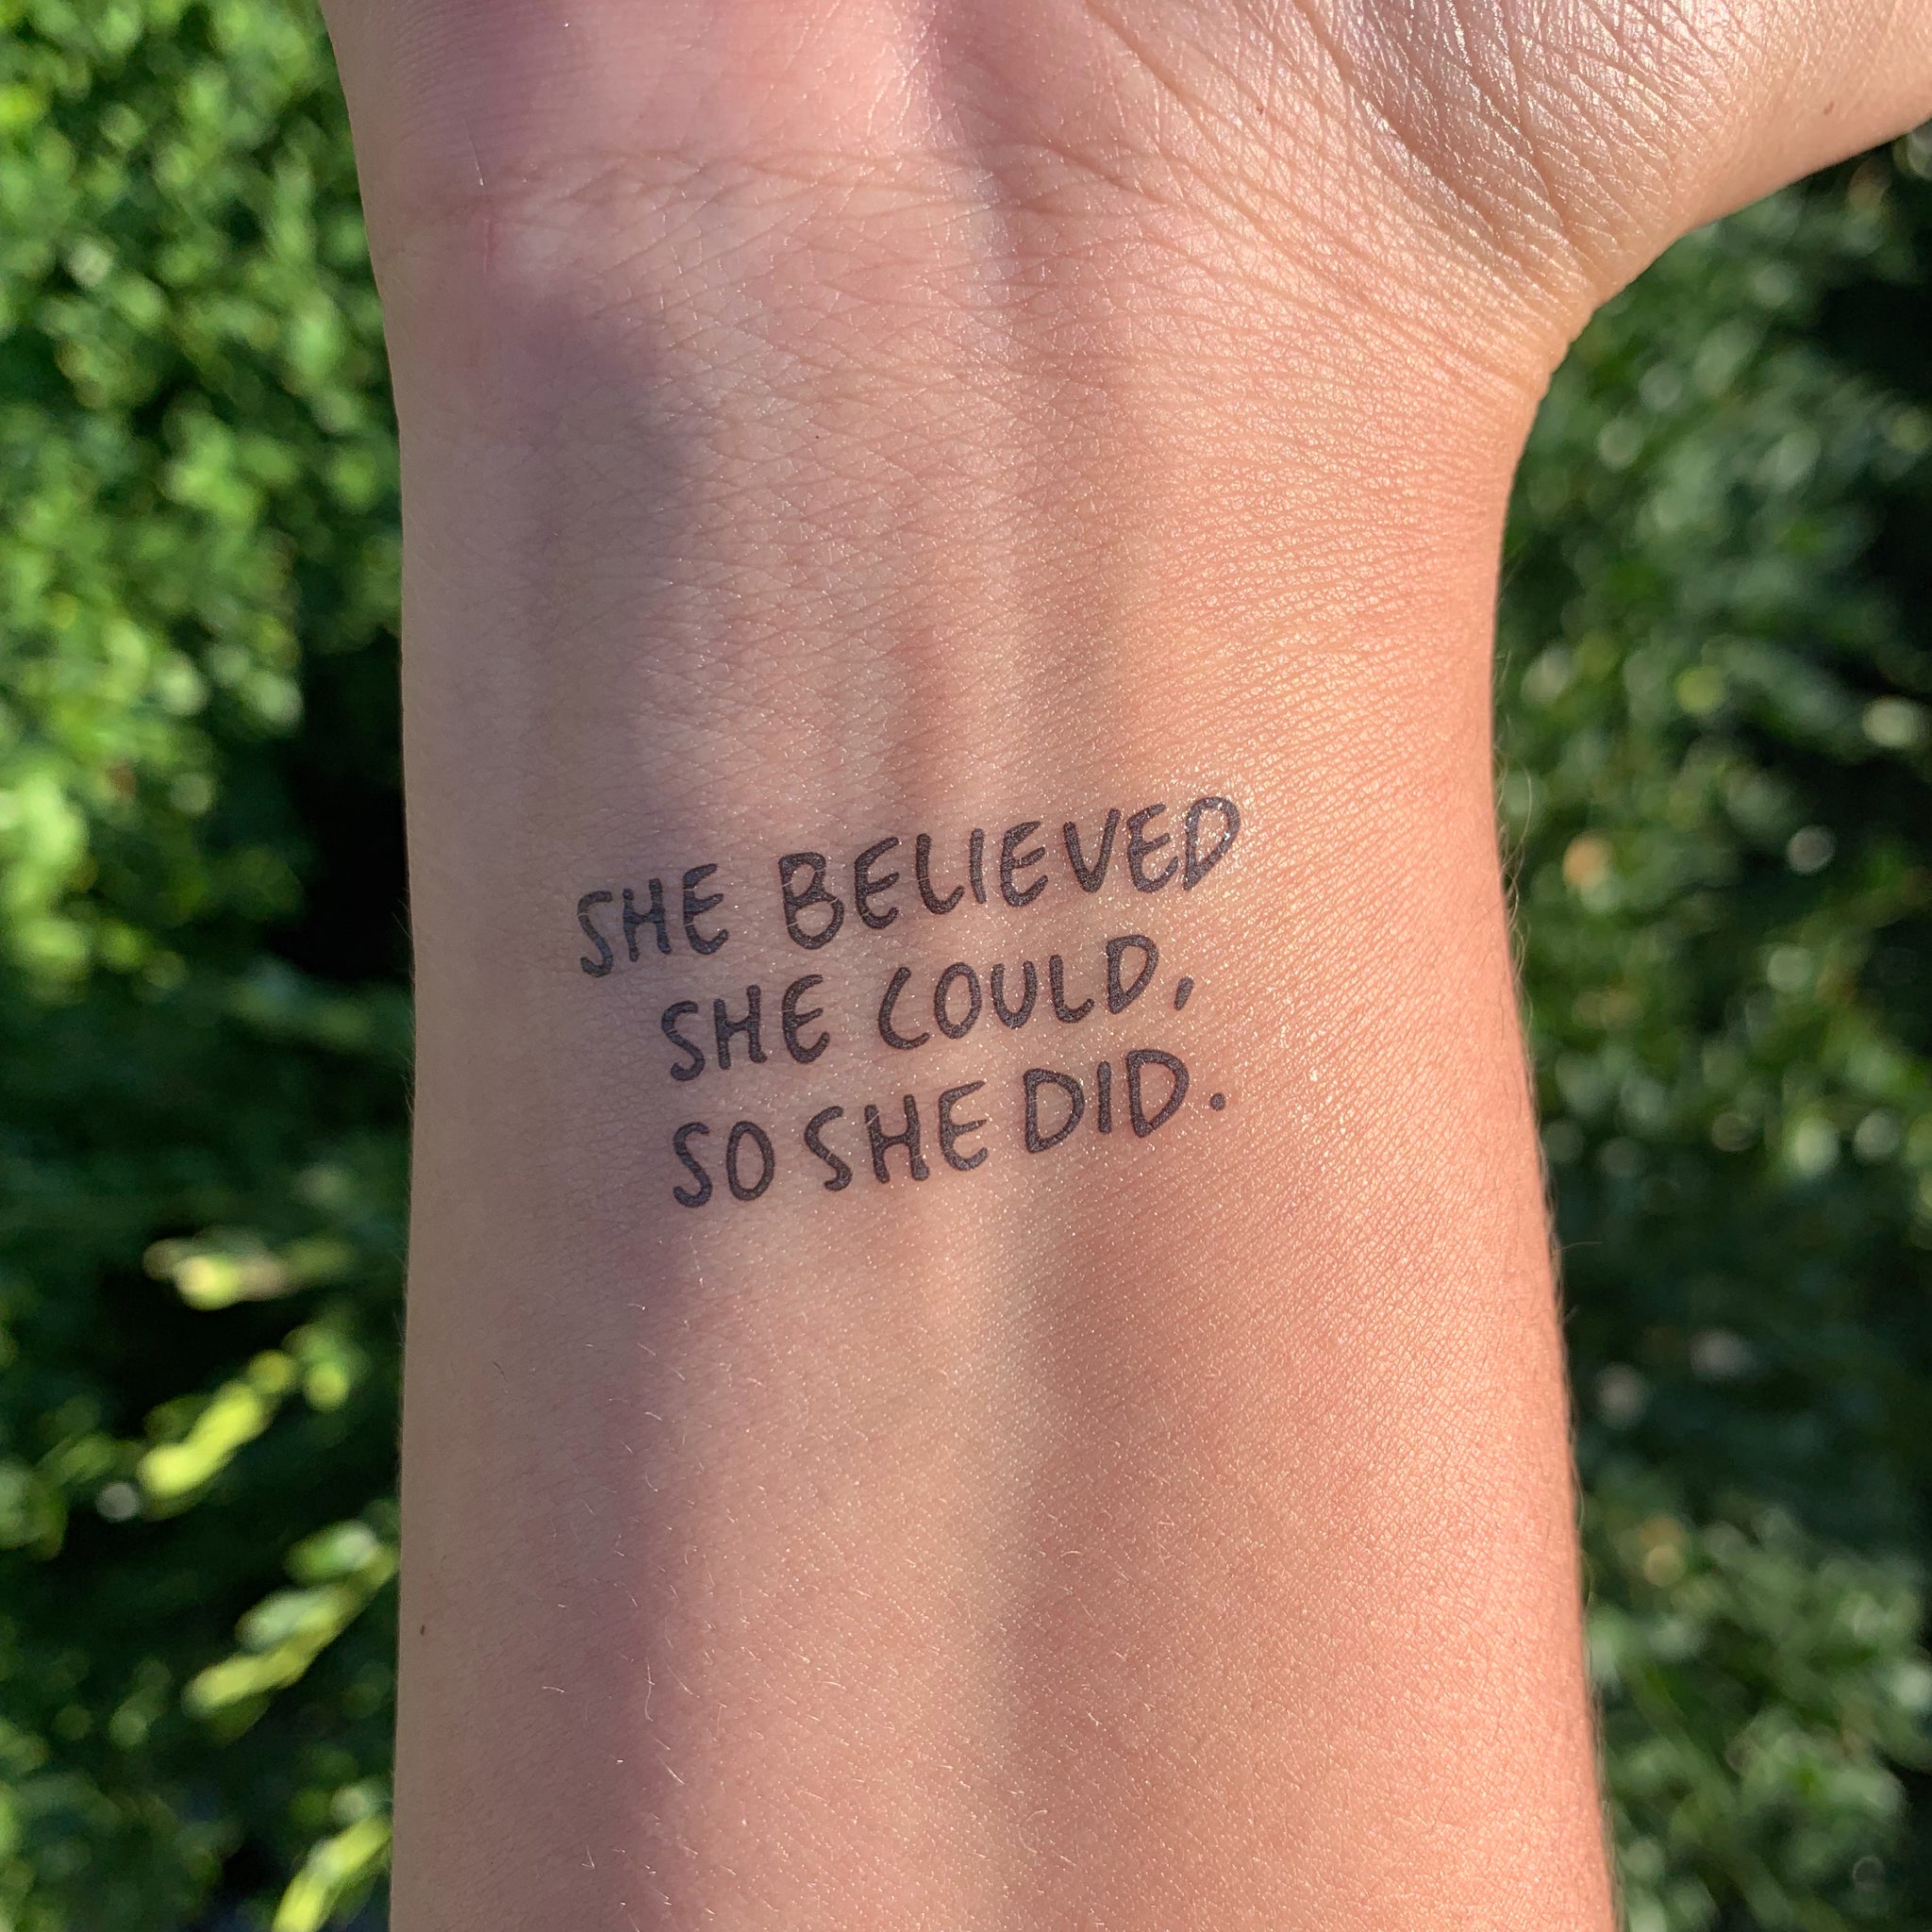 SHE BELIEVED SHE COULD, SO SHE DID.-0